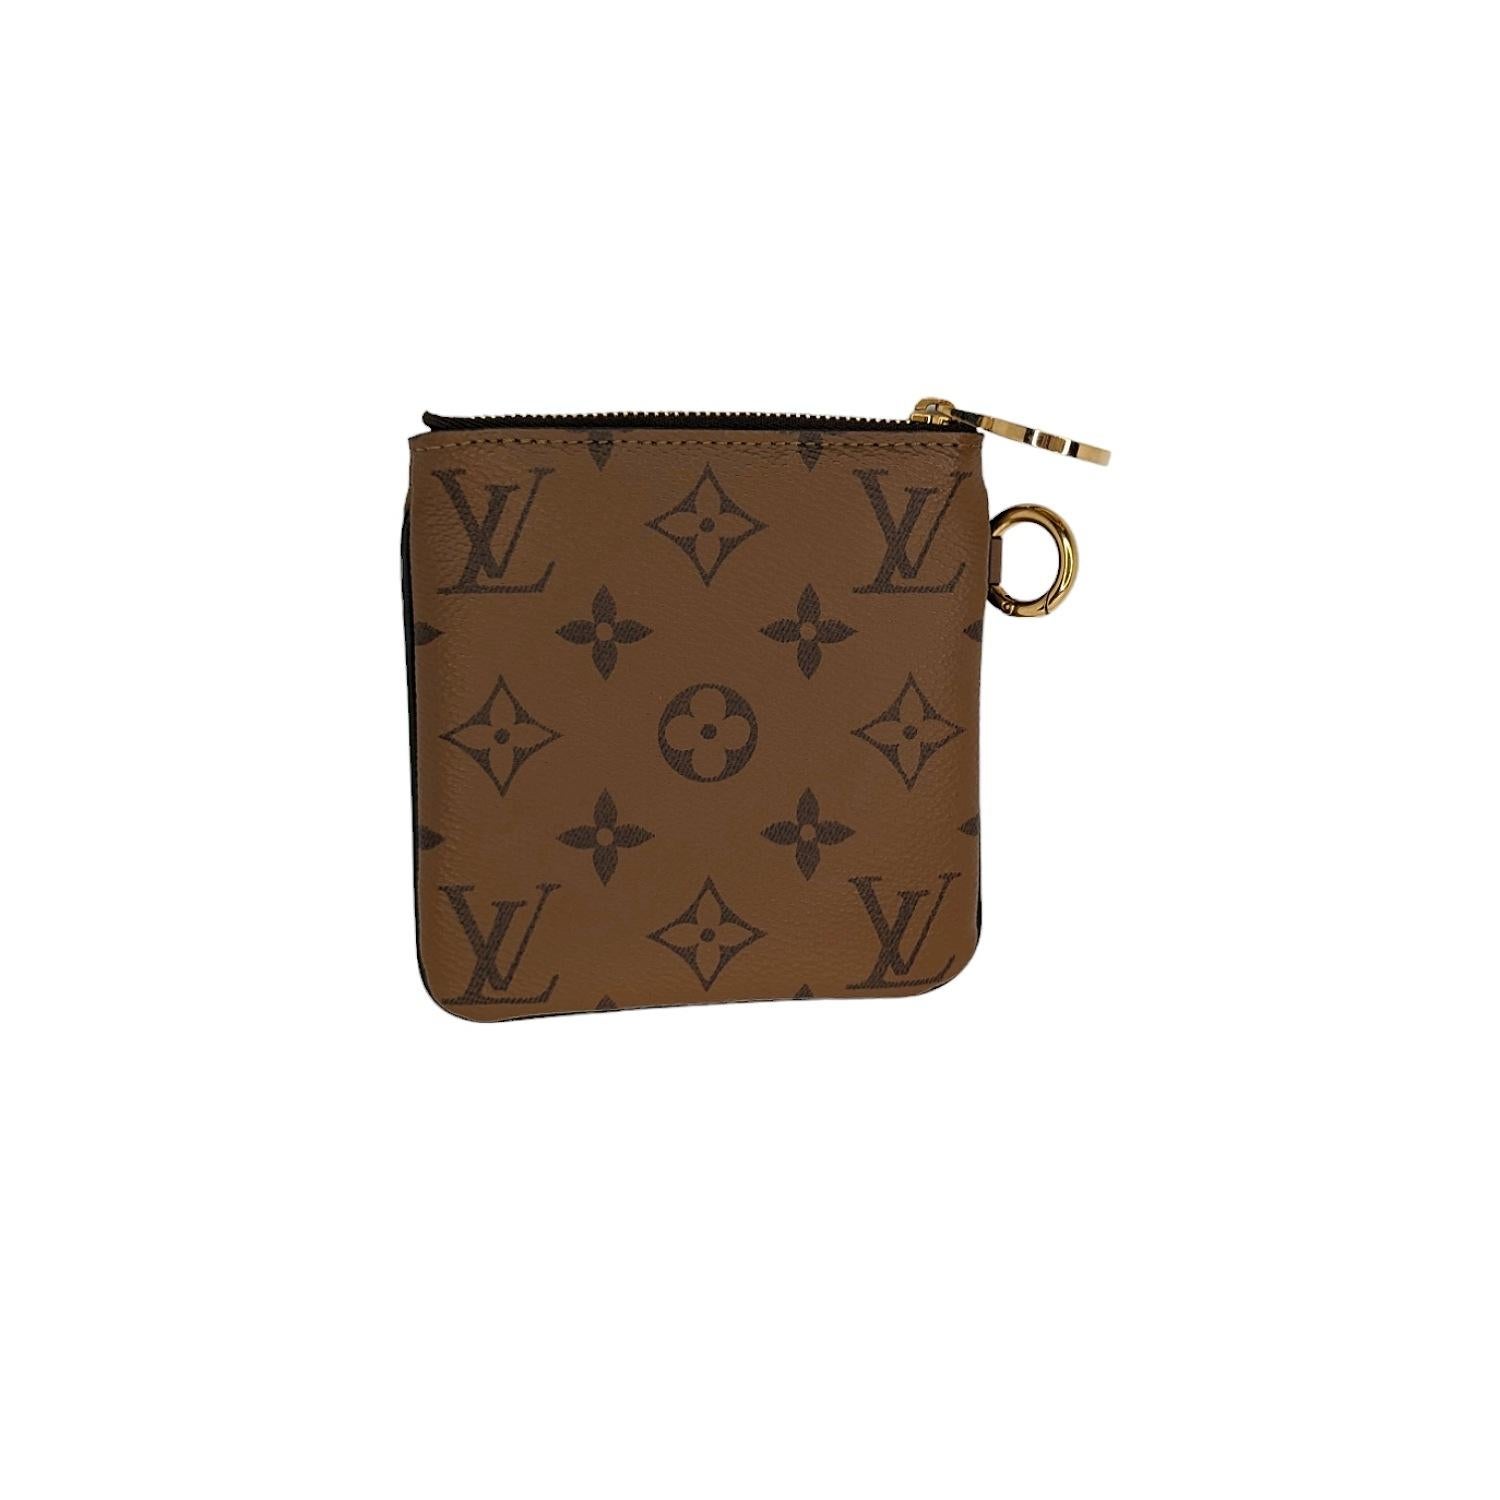 Two Pouches is an ingenious design combining two variations of Louis Vuitton's iconic Monogram canvas. Ideal for essentials, the pouches can be used together or separately, and carried in the hand or attached to a bag or belt. They are secured with